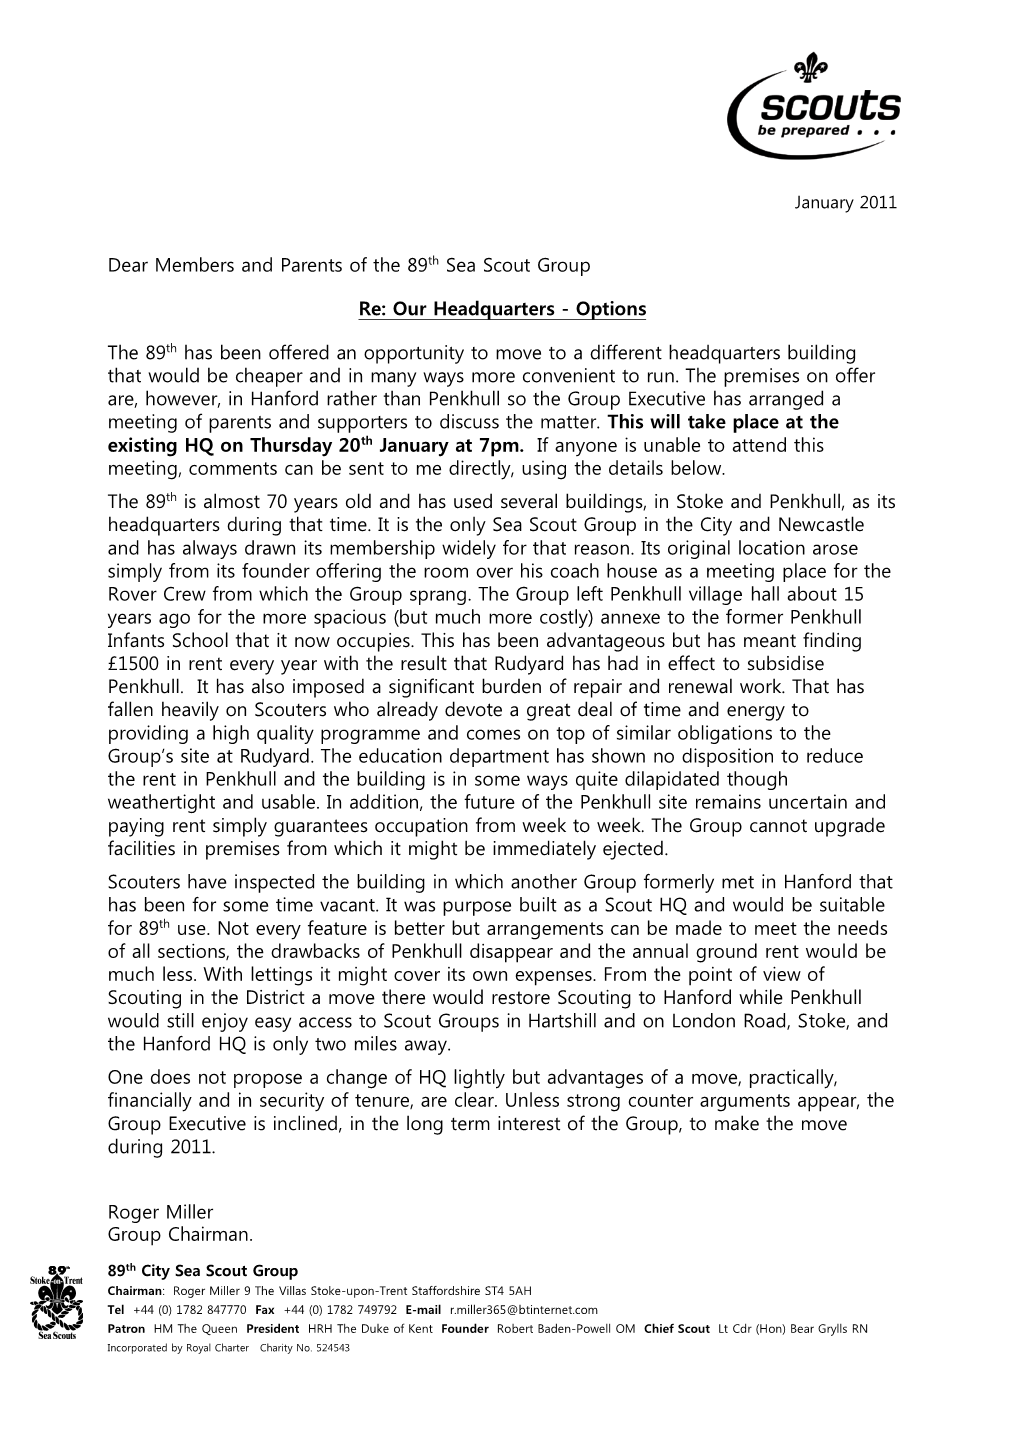 Dear Members and Parents of the 89Th Sea Scout Group